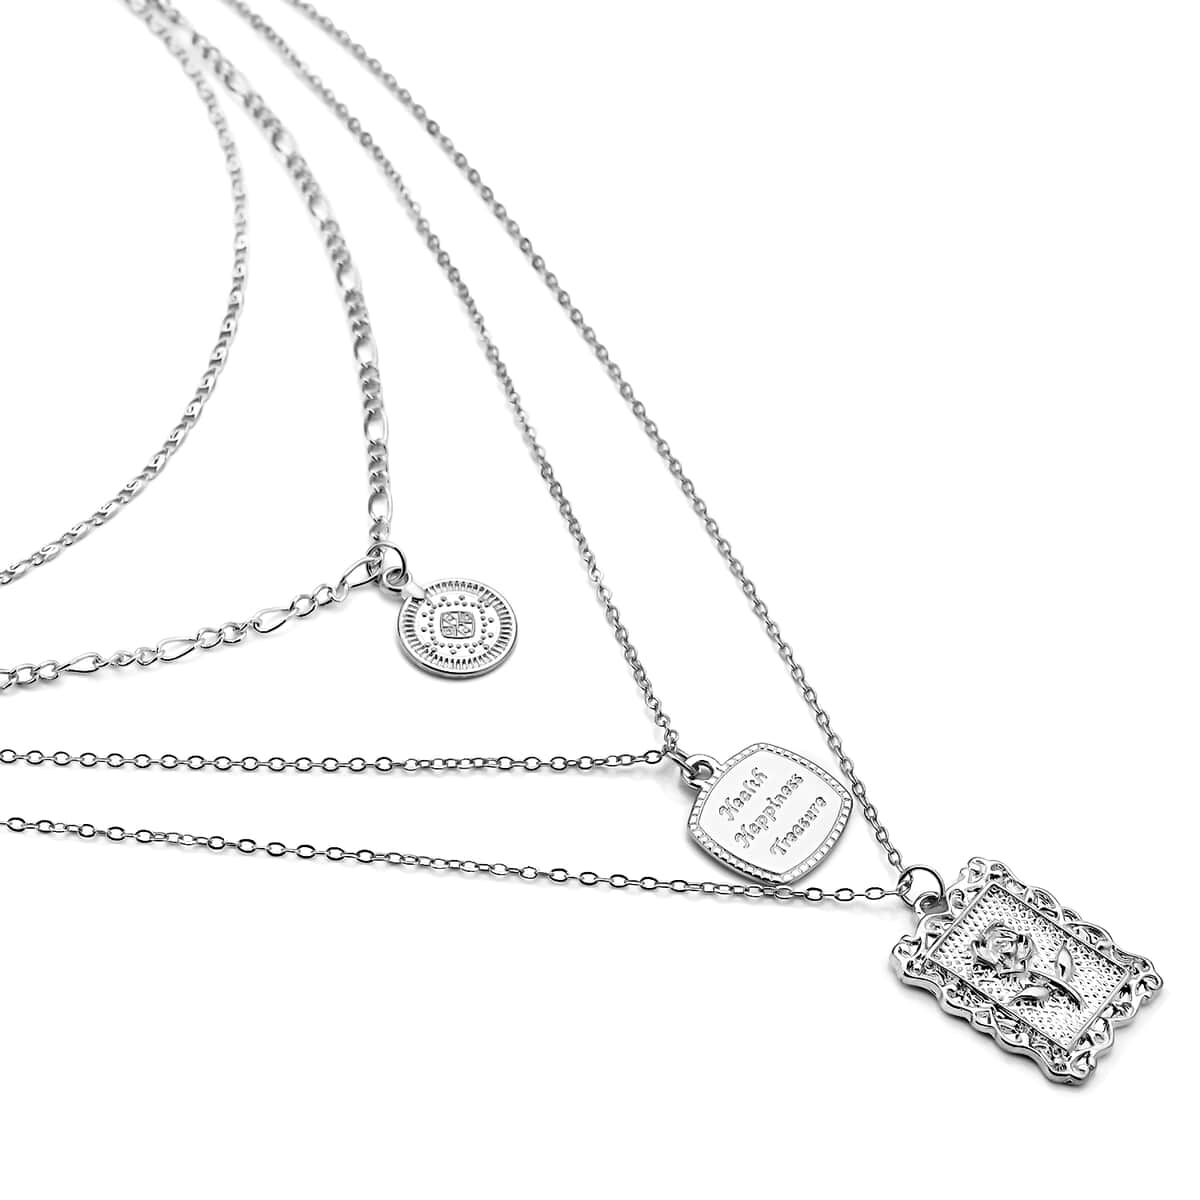 Multi Shape Coin Charm Layered Link Chain Necklace 18.5-20.5 Inches in Silvertone image number 2